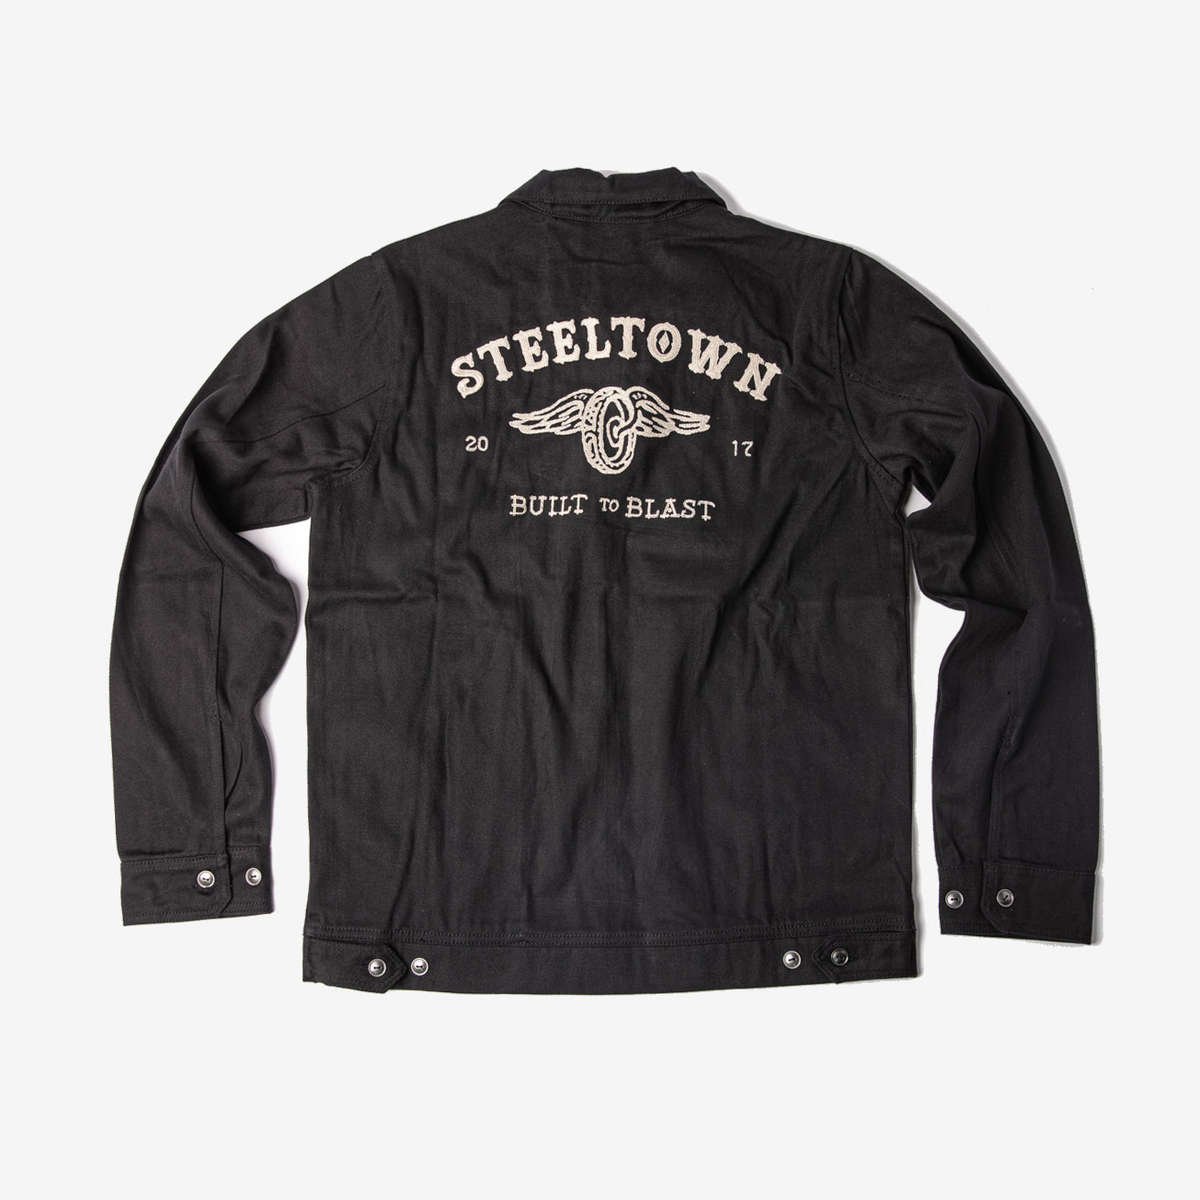 A Jacket Inspired By 50s Car Clubs – Steeltown Garage Co.